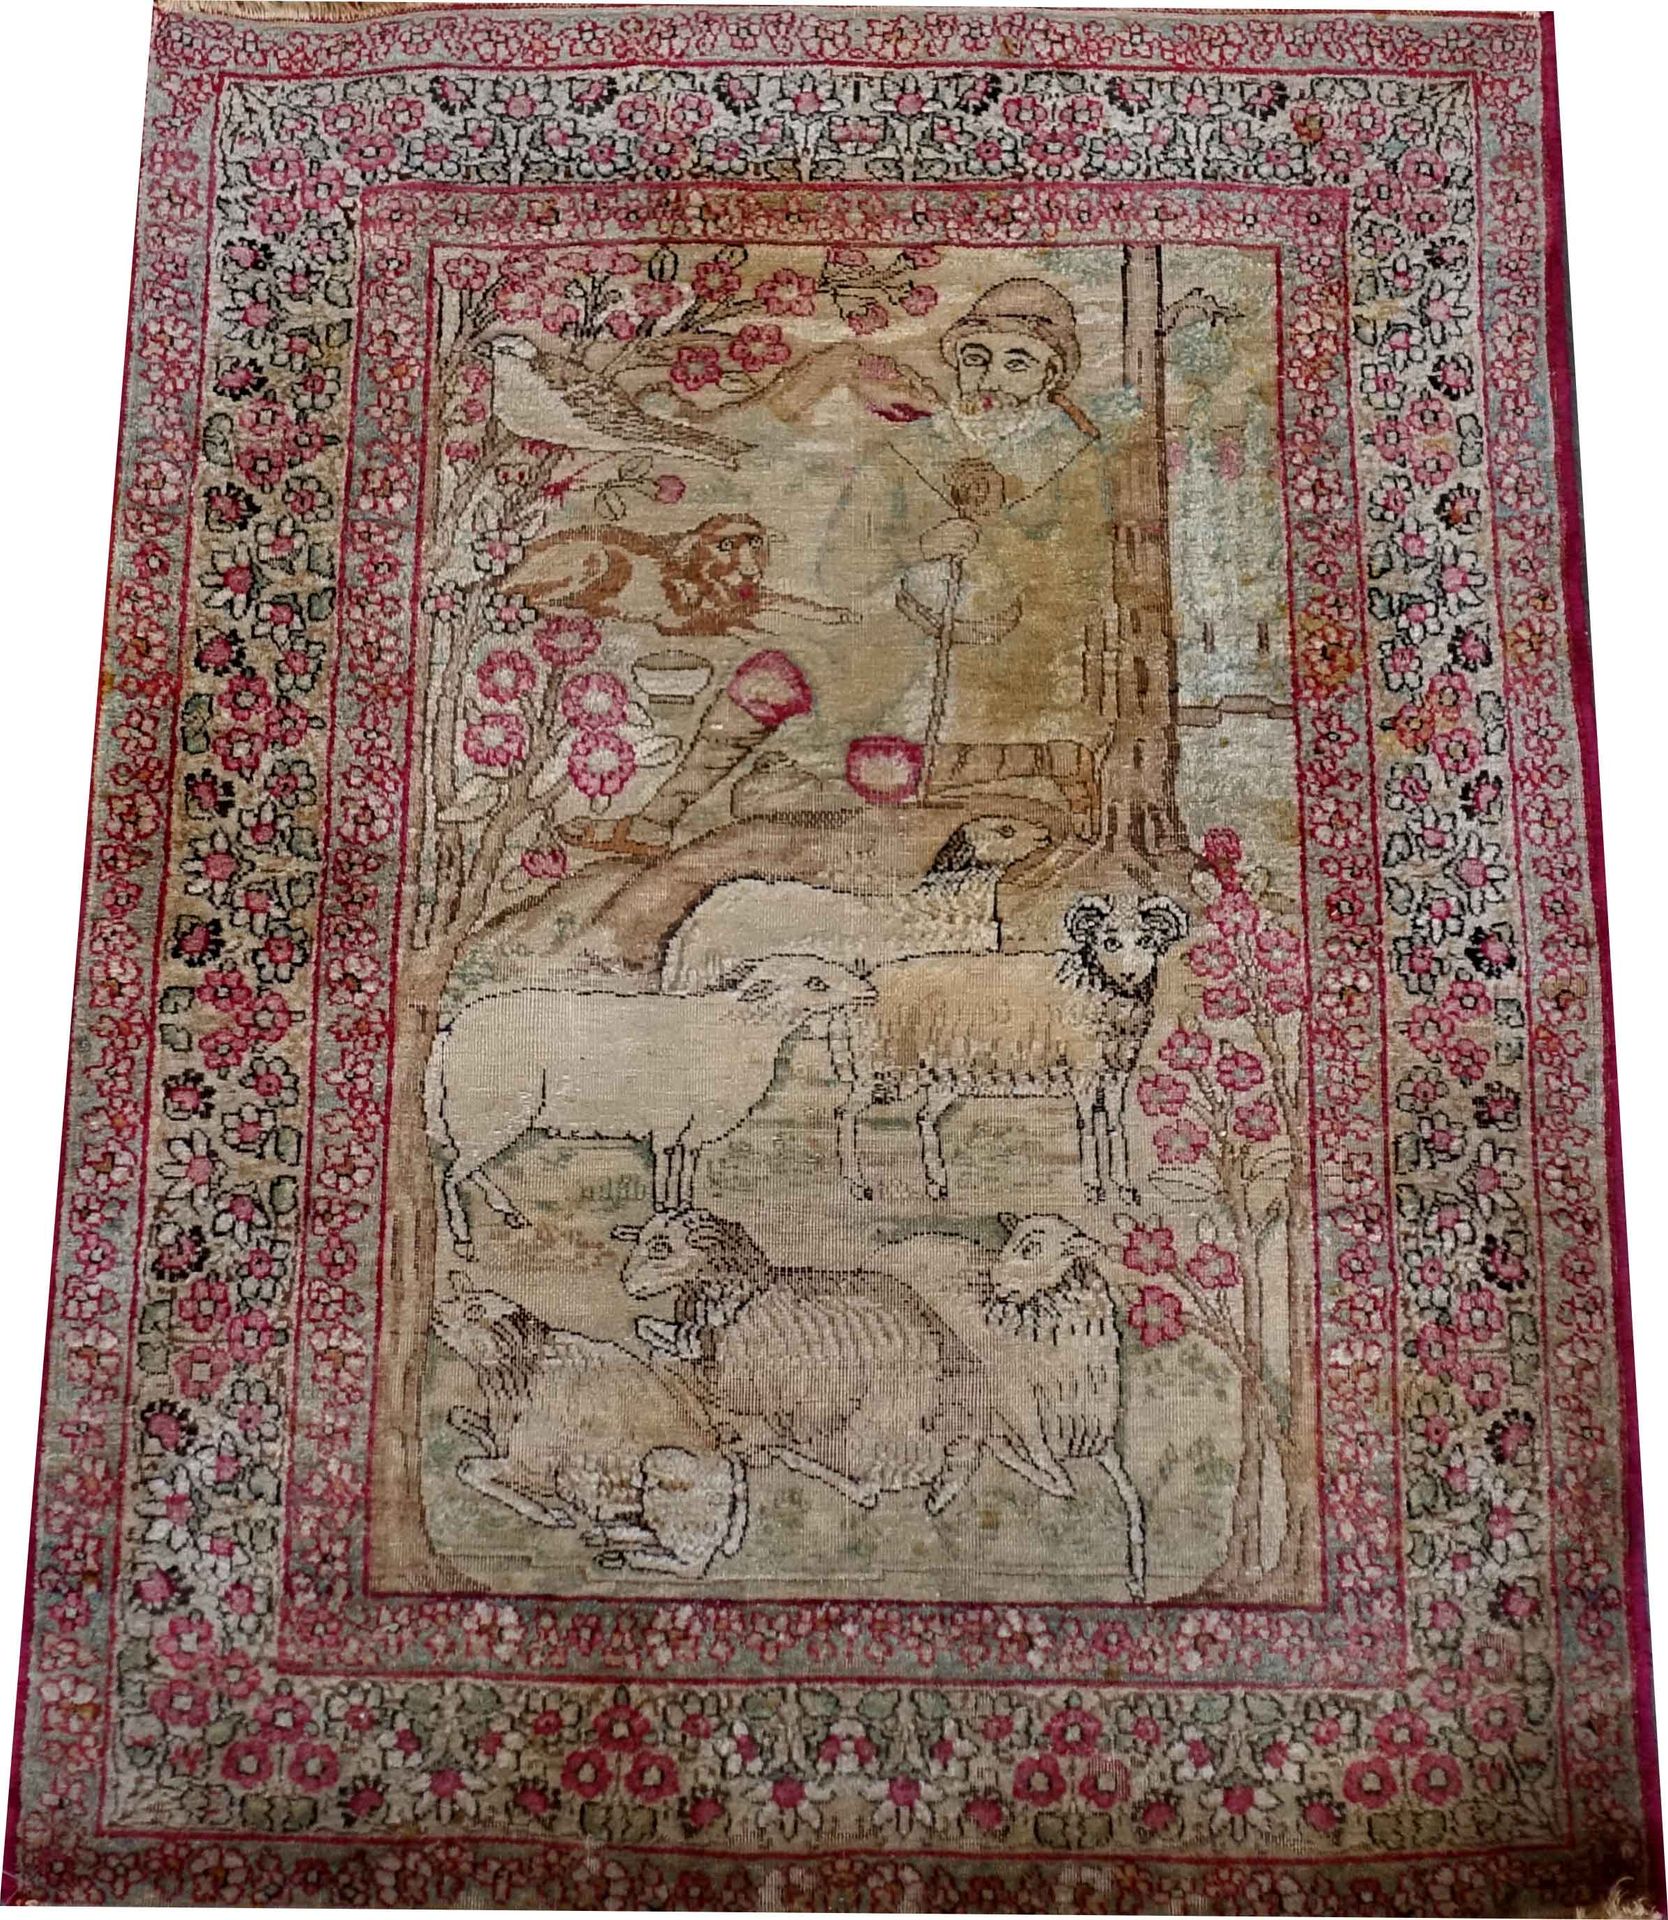 Carpette figurative Kirman. It presents a shepherd with his dog and his flock of&hellip;